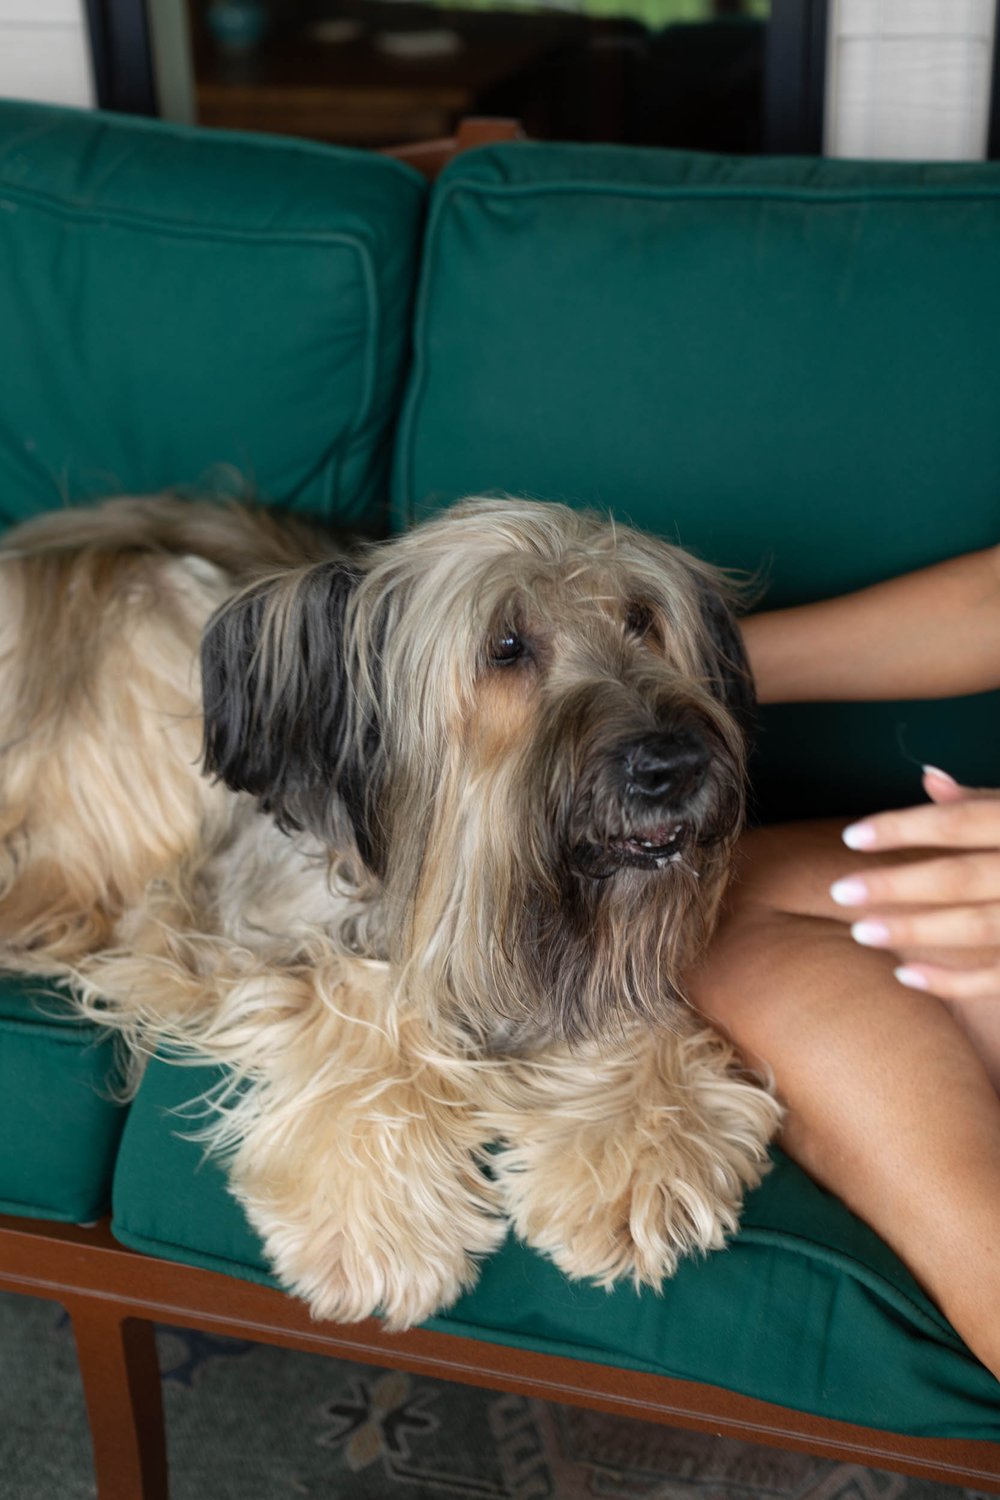  a scruffy dog sitting on a green couch while having it’s head scratched 